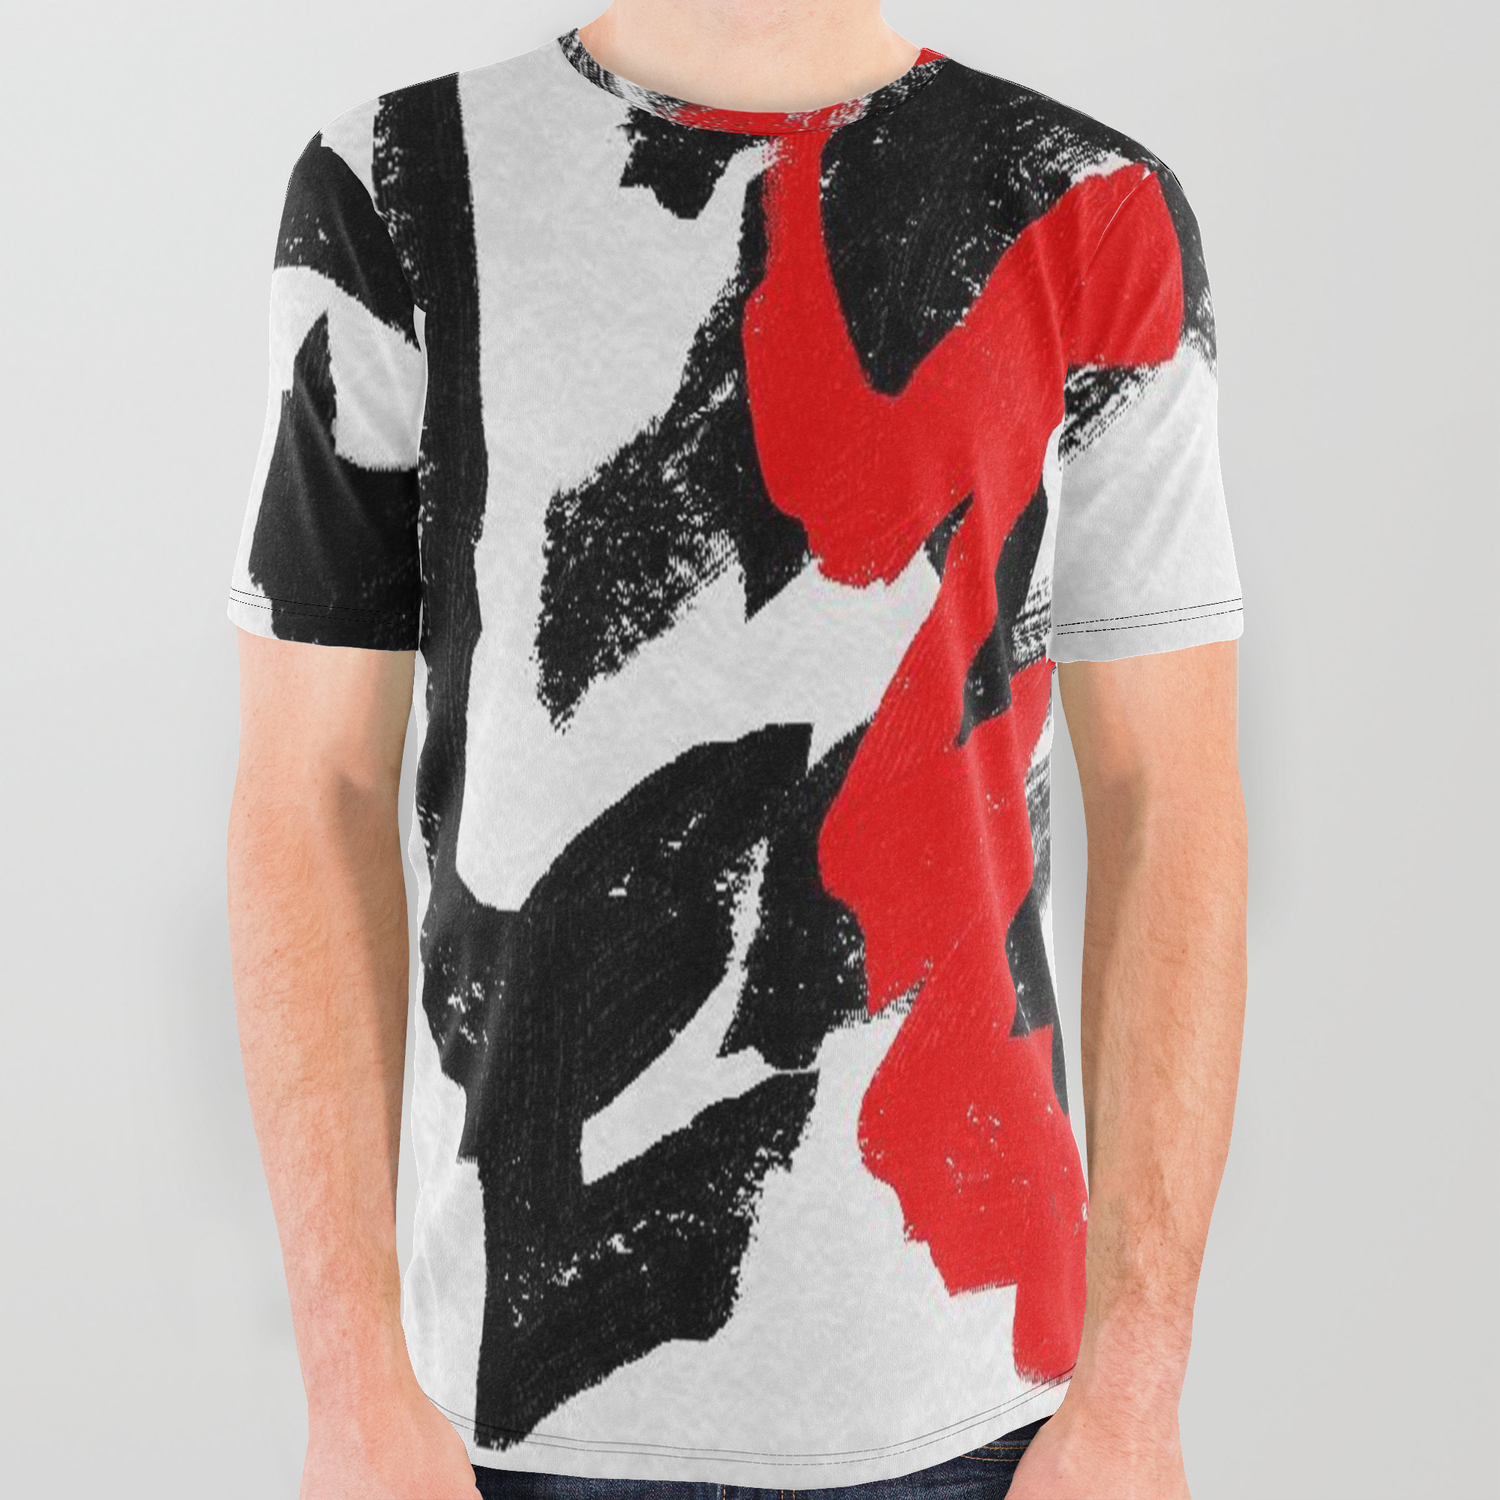 black & red graphic tee